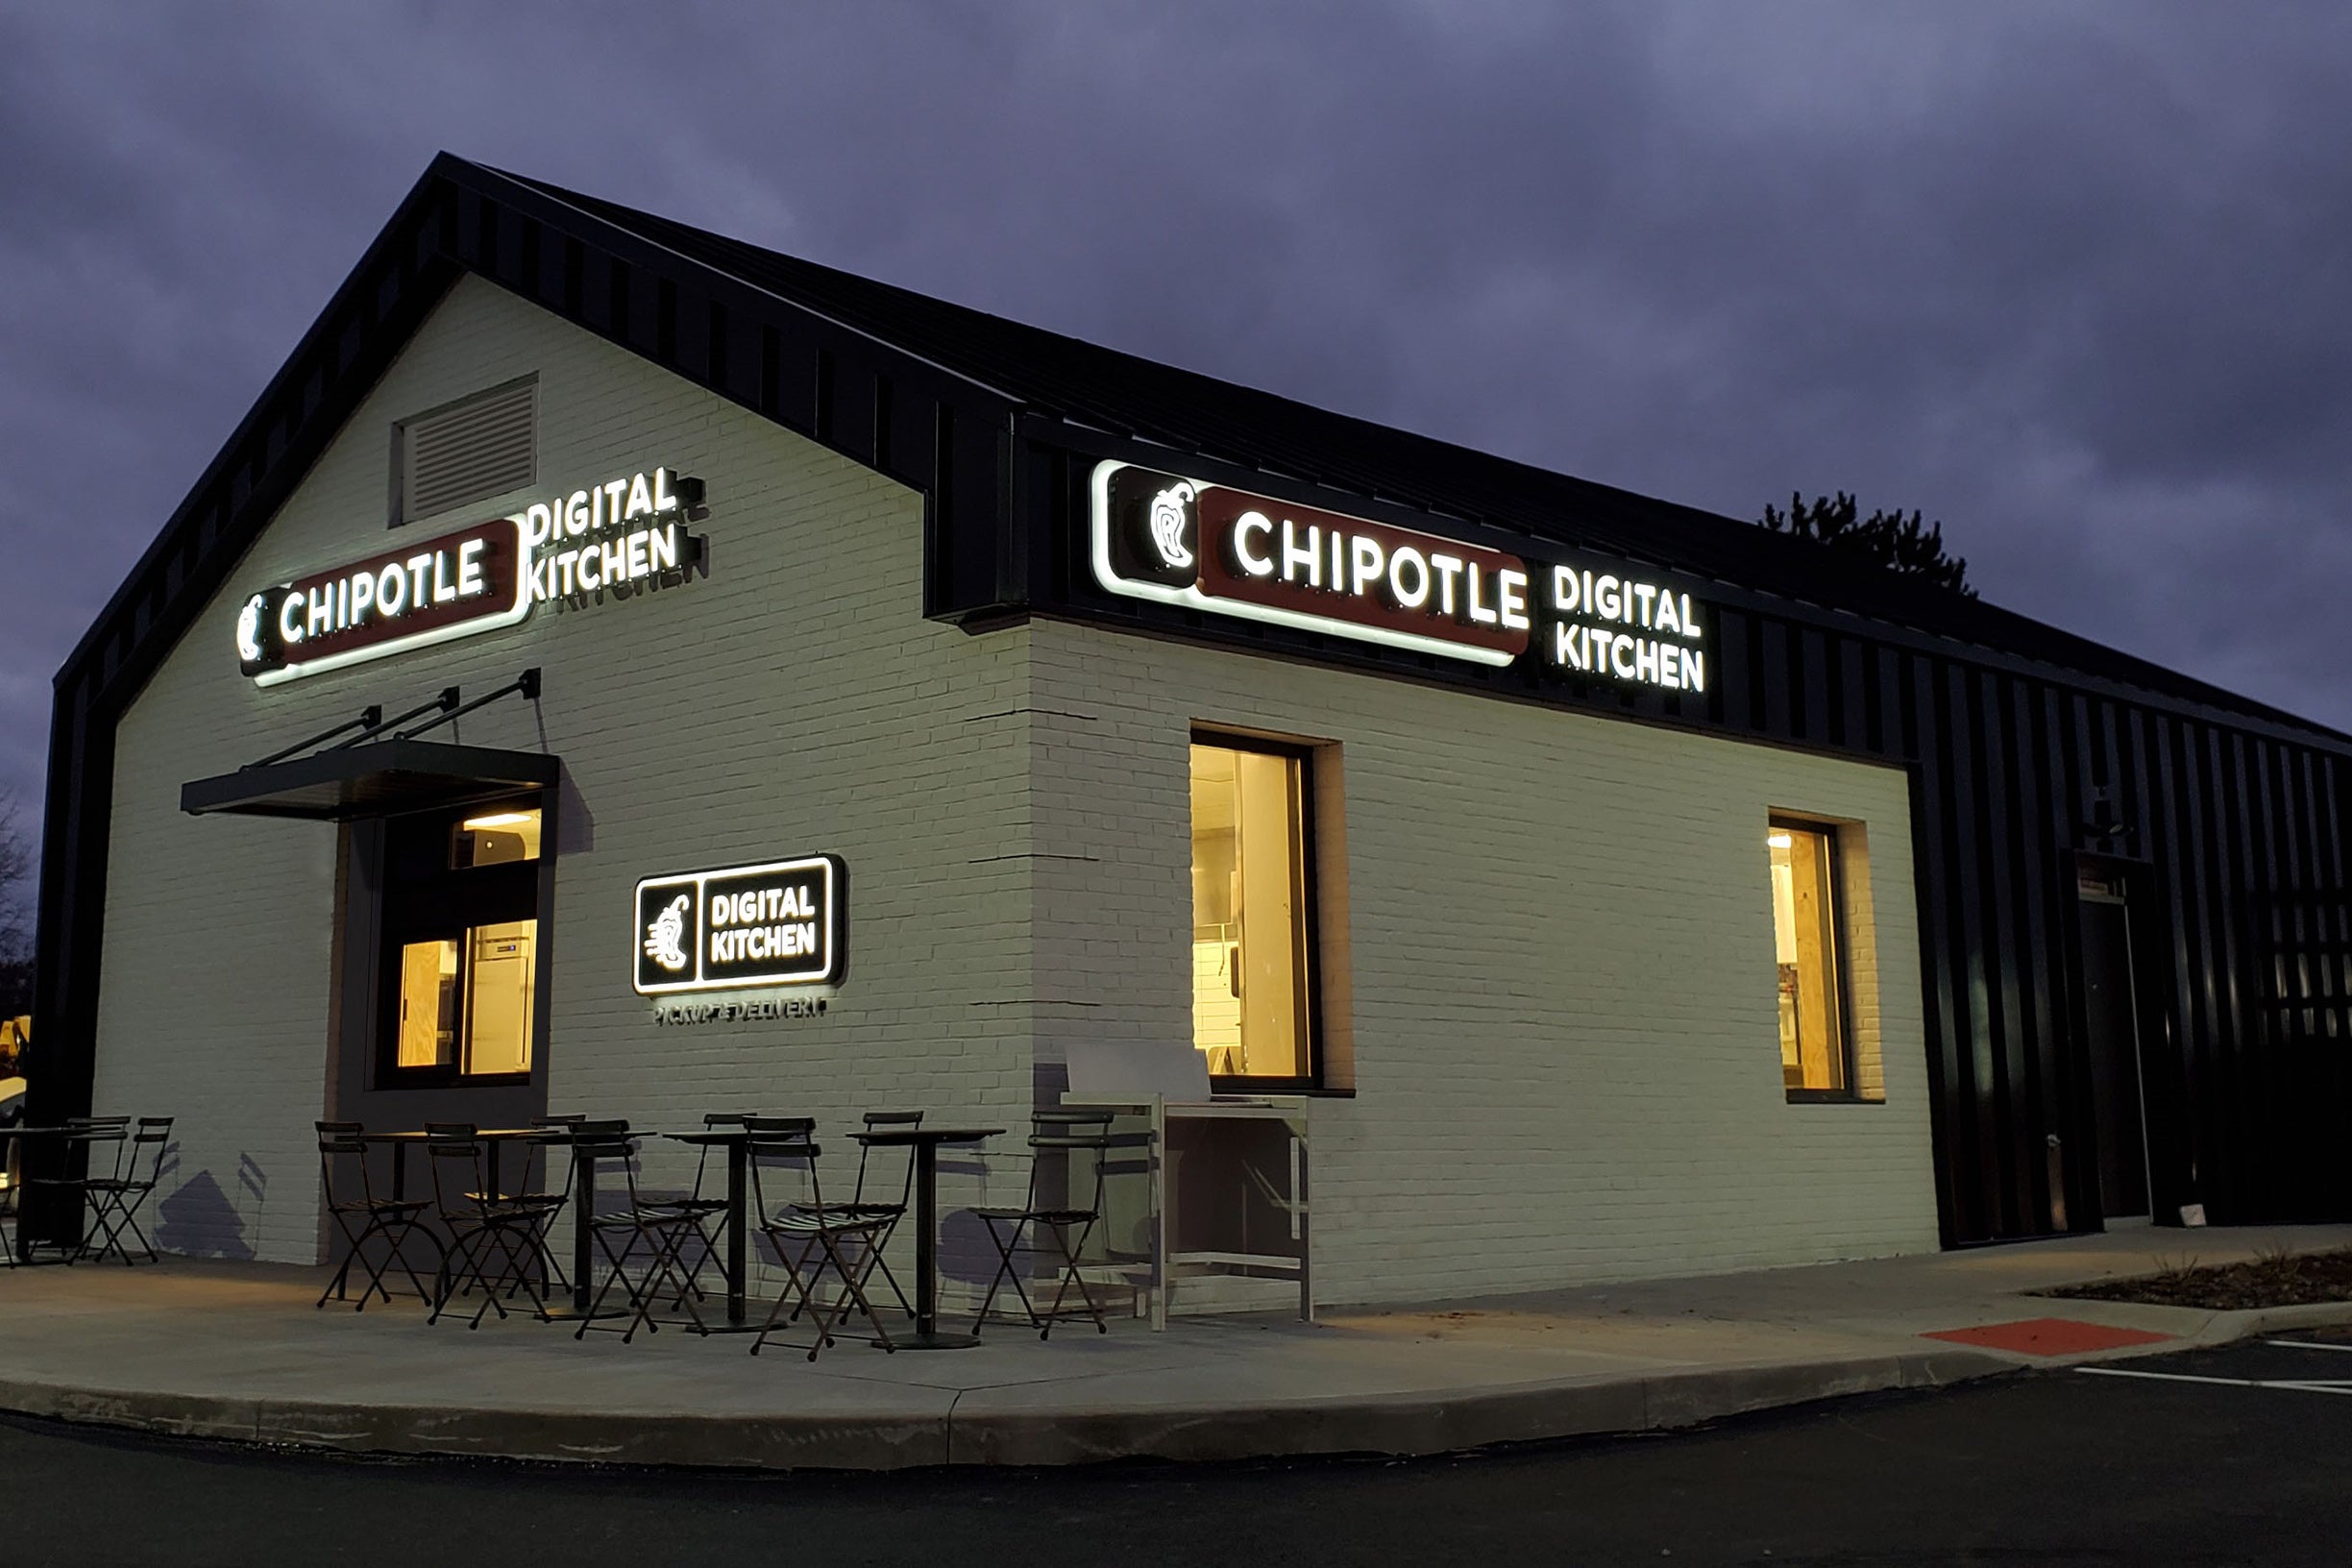 The exterior of a tiny Chipotle store. Free-standing. At night.